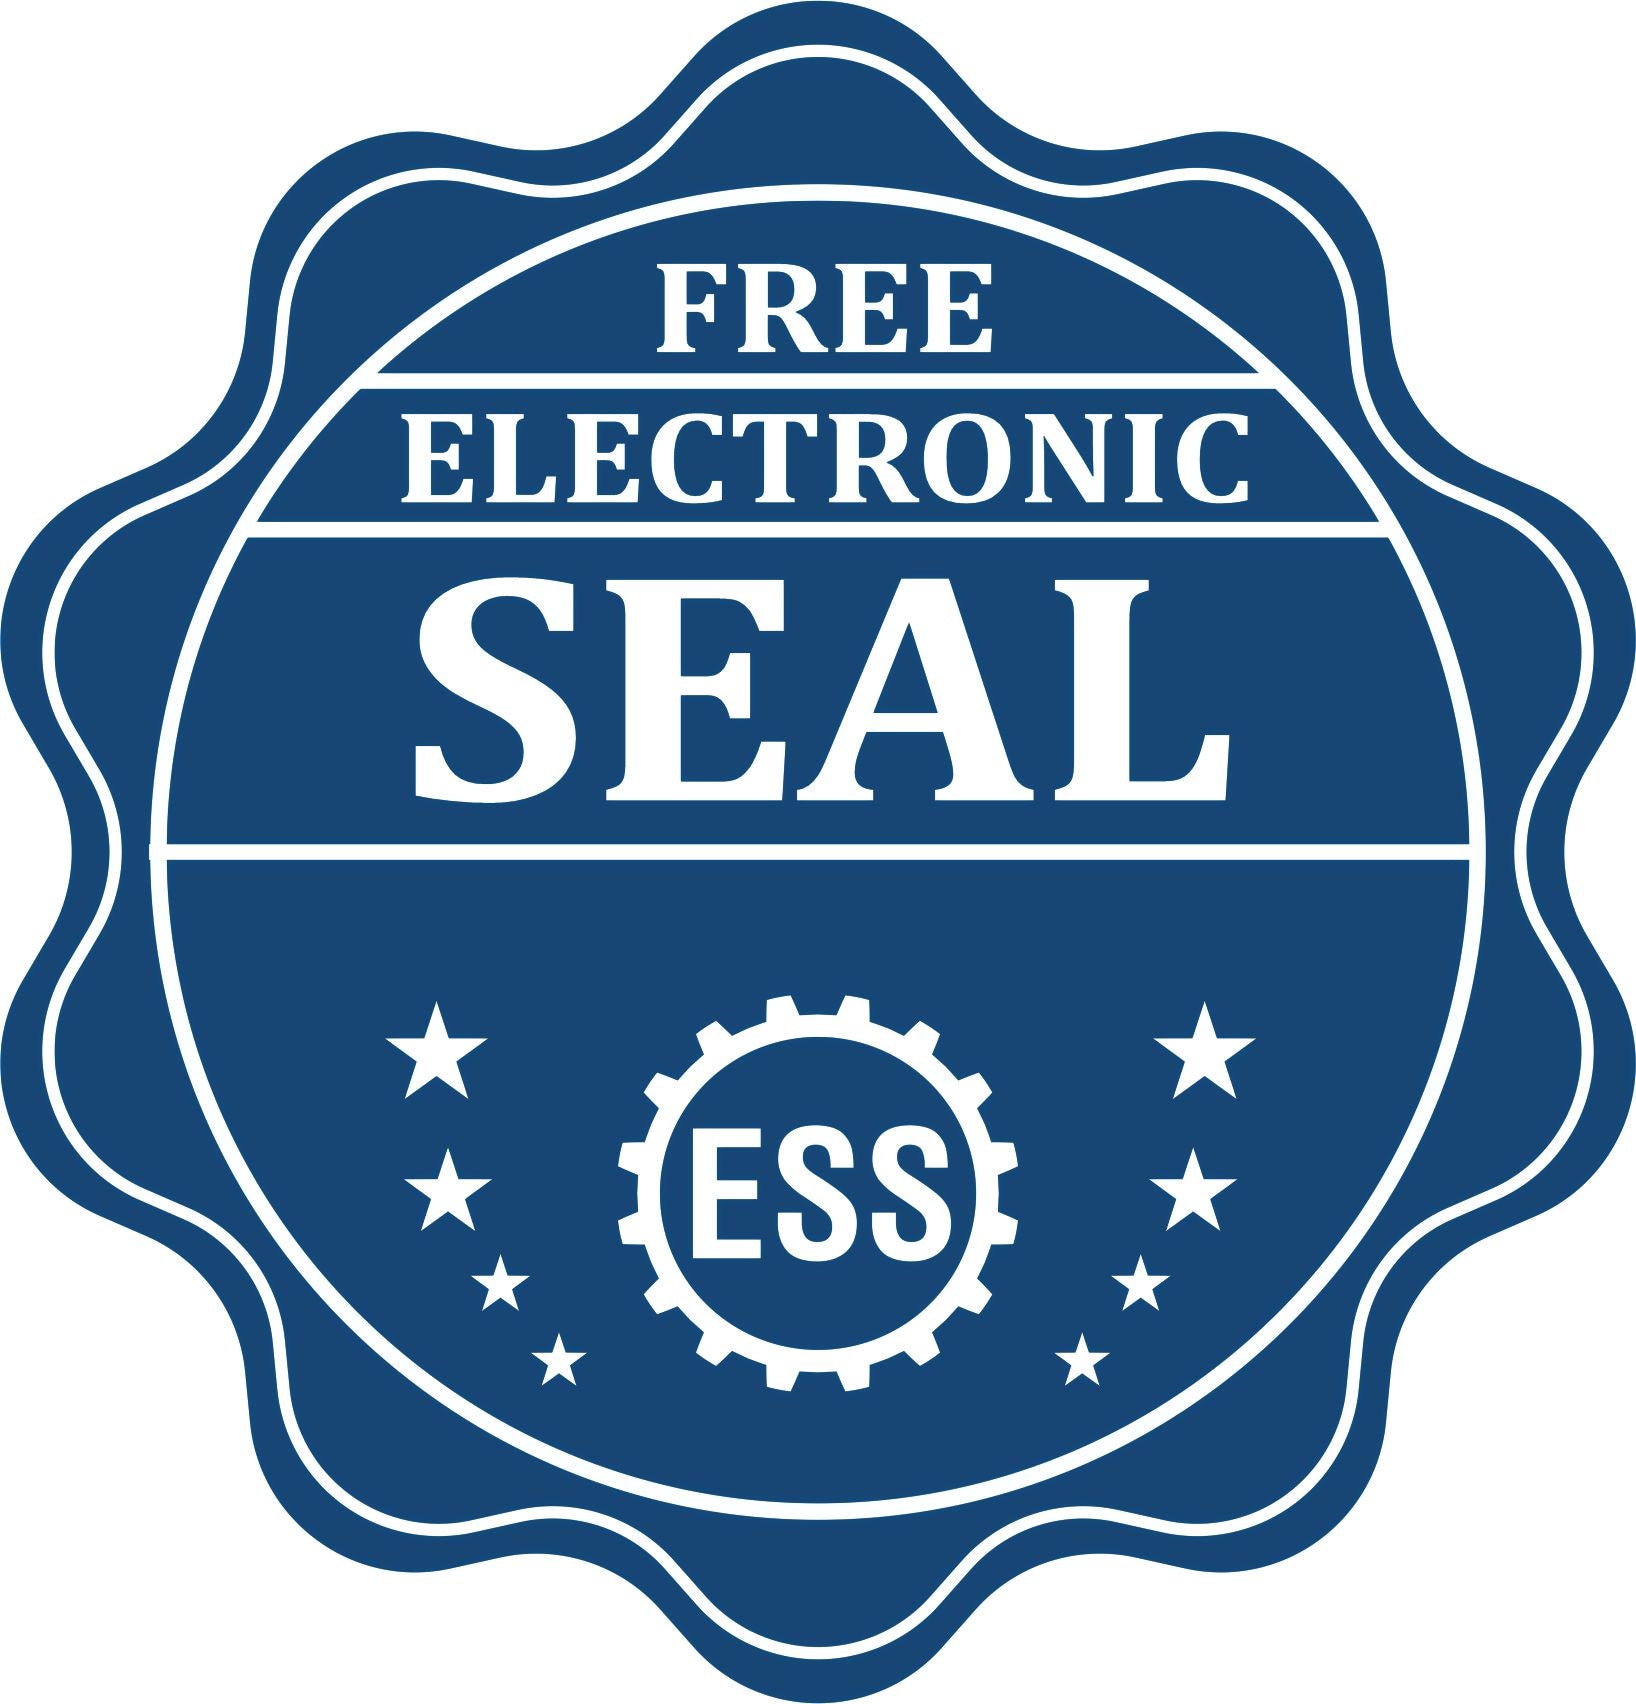 A badge showing a free electronic seal for the Soft Pocket New Mexico Landscape Architect Embosser with stars and the ESS gear on the emblem.